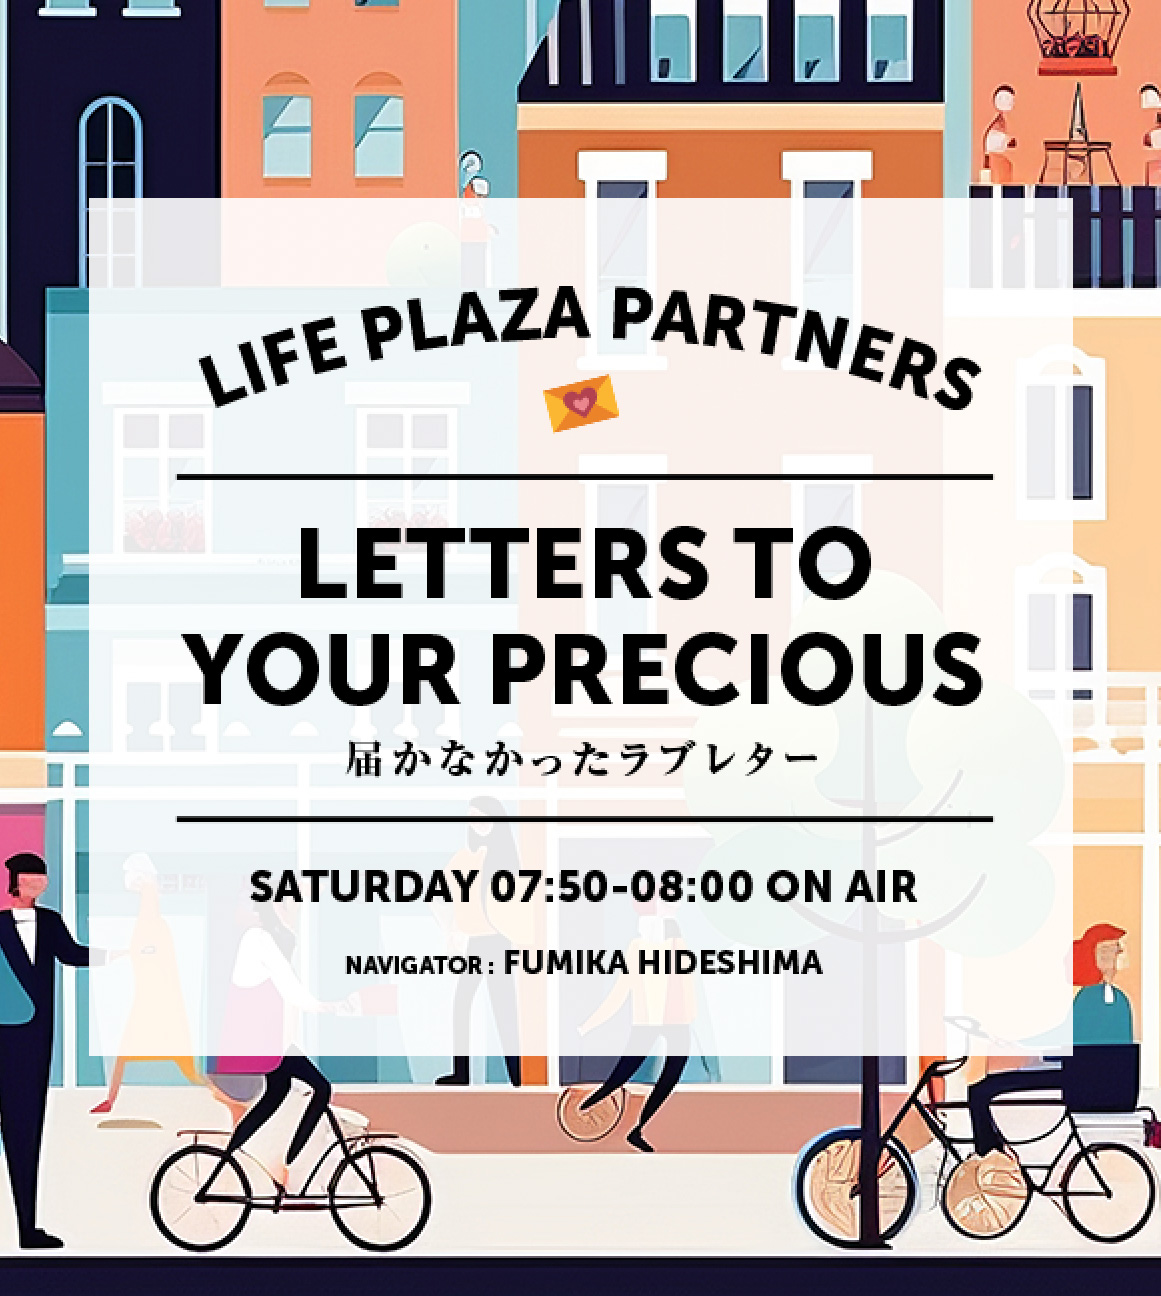 LIFE PLAZA PARTNERS LETTERS TO YOUR PRECIOUS | SATURDAY 07:50 - 08:00